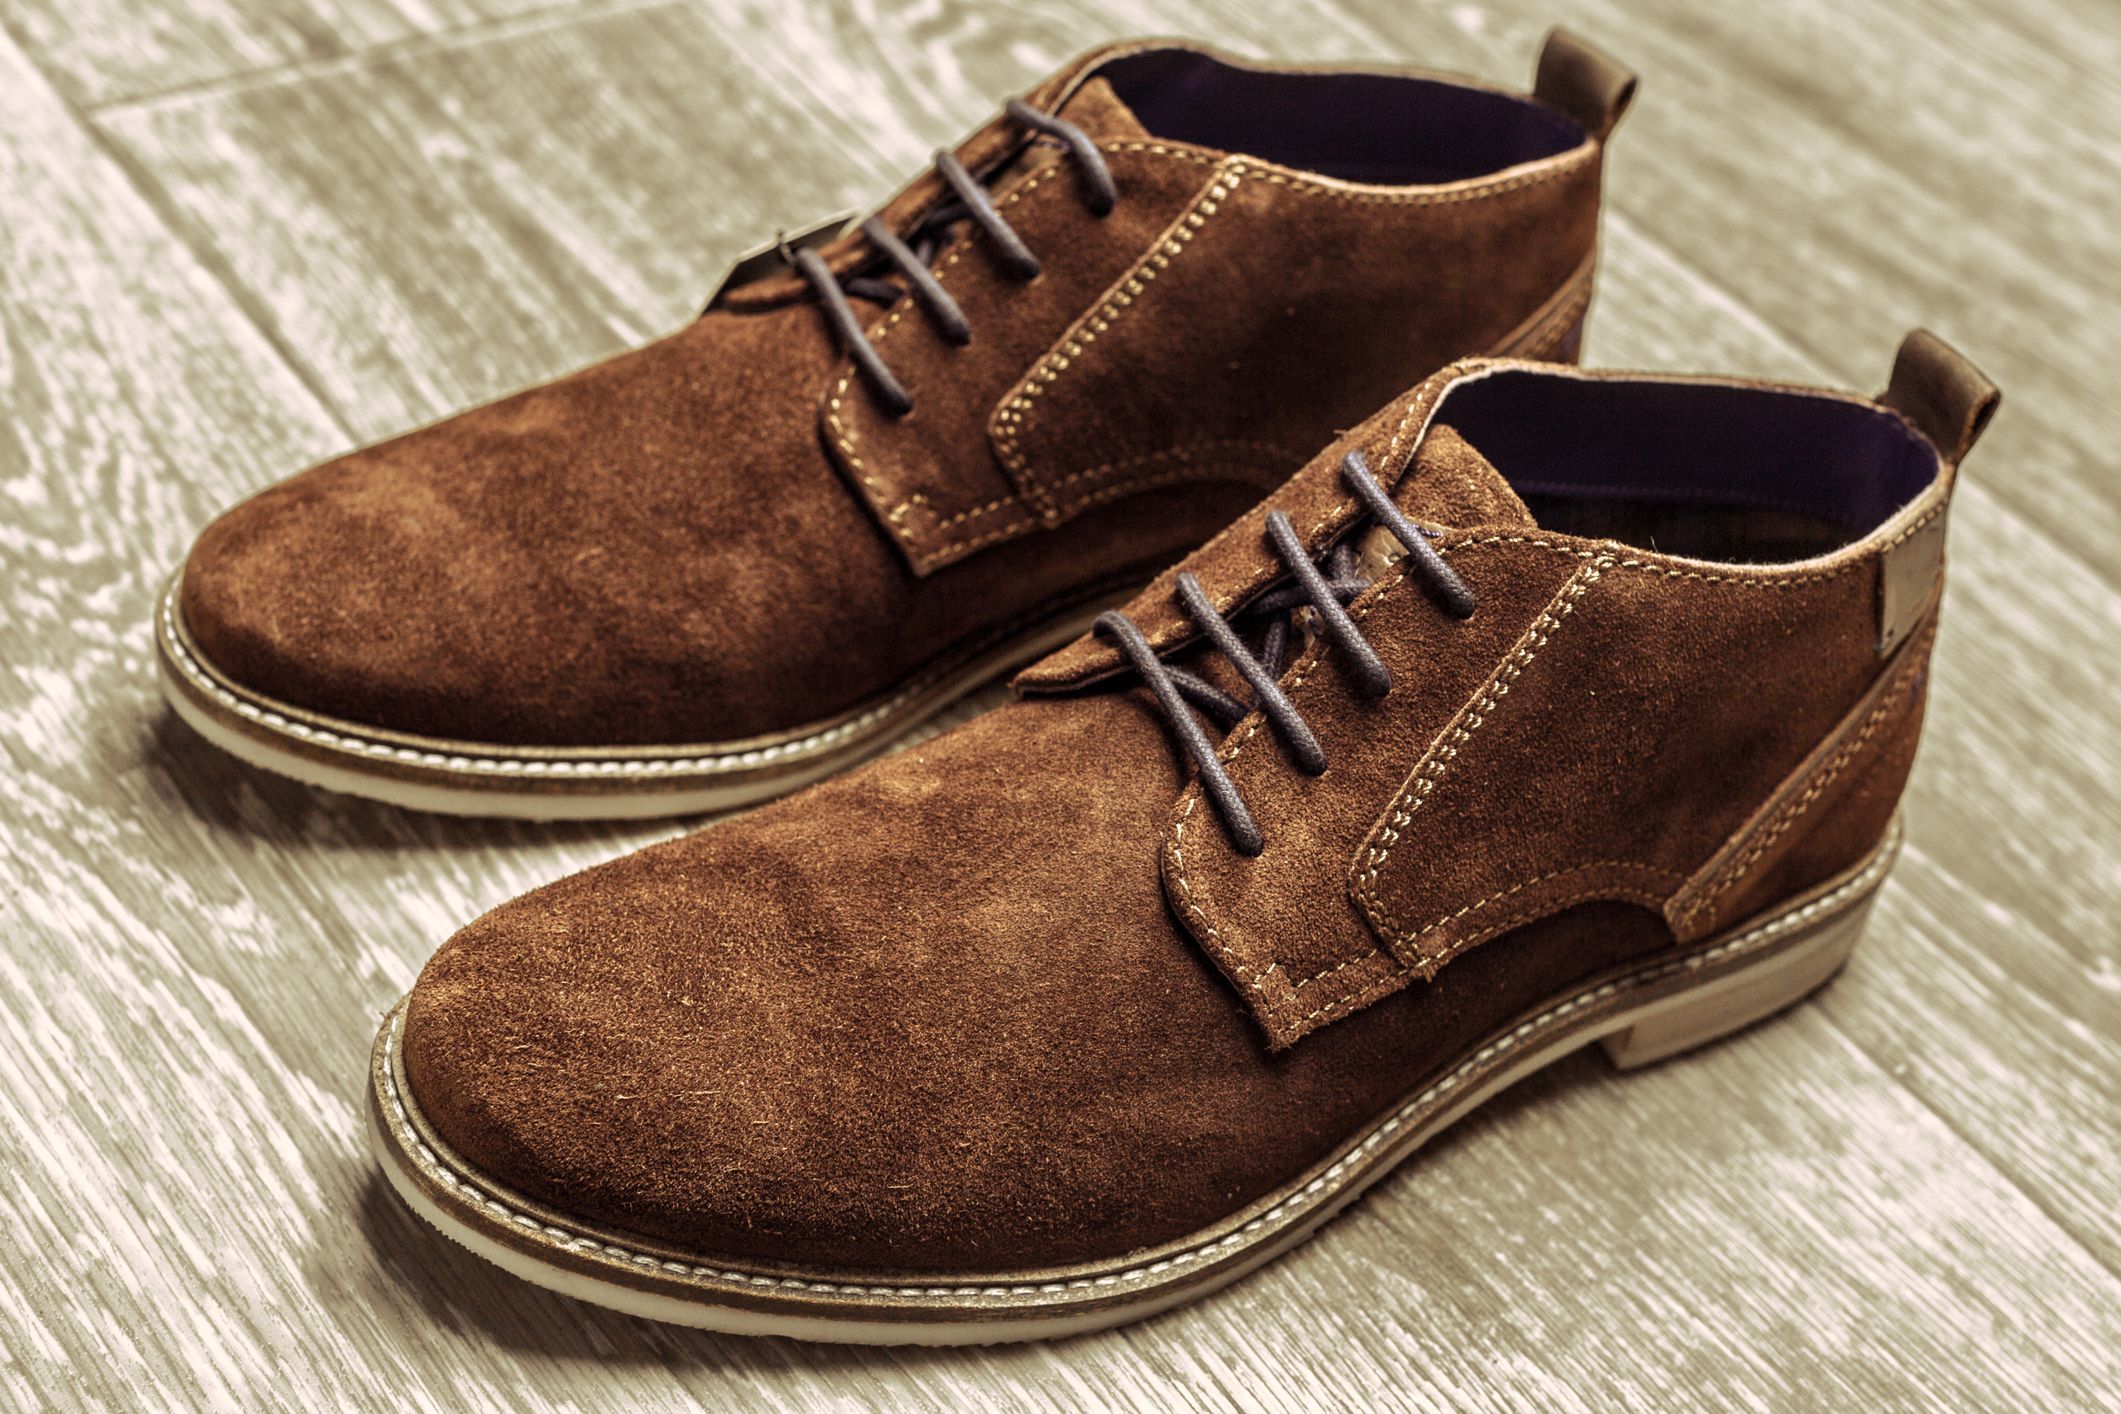 How to Clean Suede - How to Clean Suede Shoes or Boots